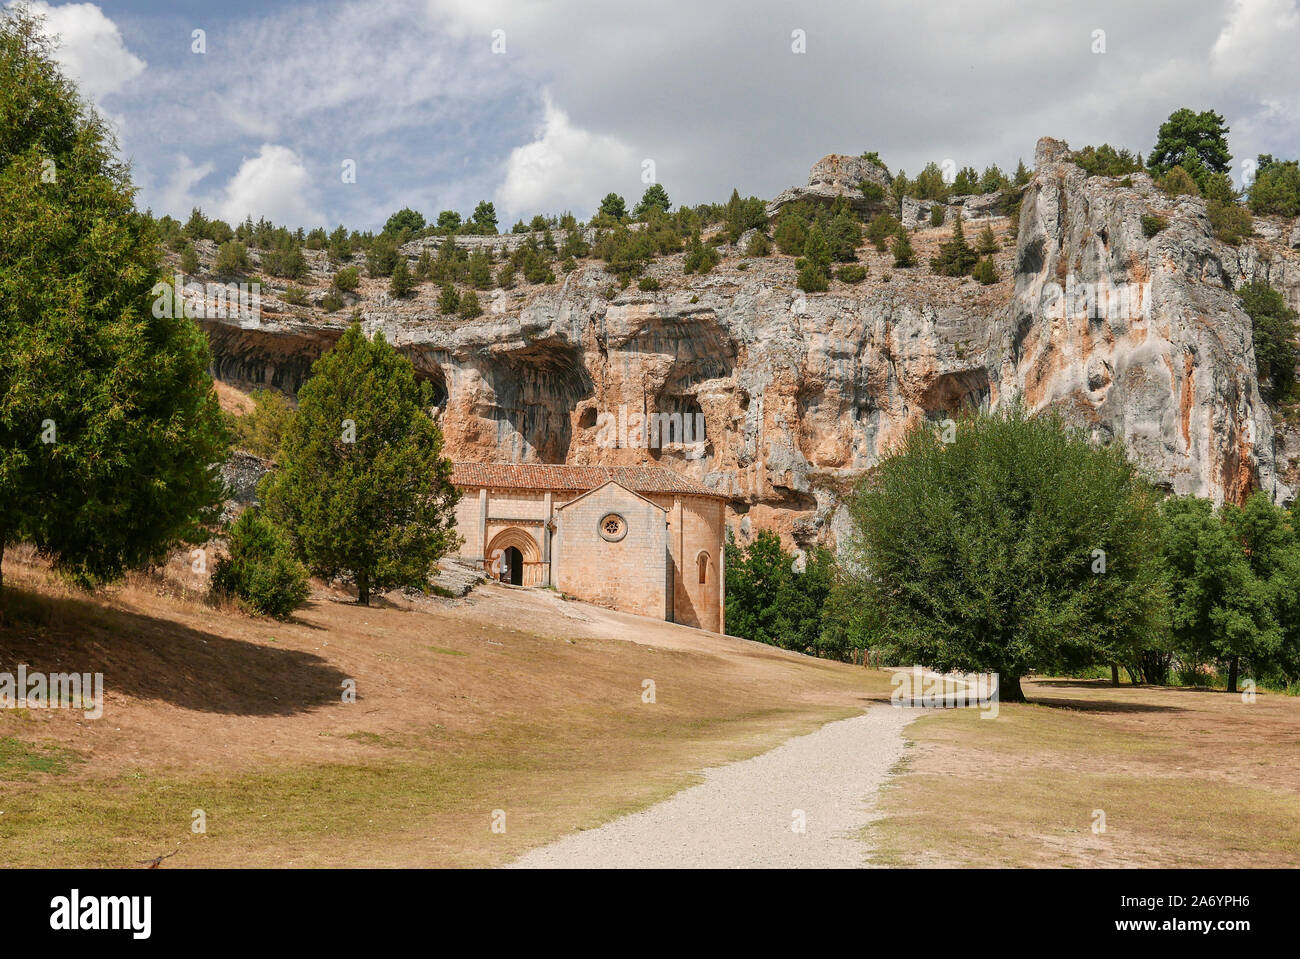 Spain, Castile and Leon: Landscape of the Canon del Rio Lobos Nature Park, situated in the provinces of Soria and Burgos. Here, the Romanic-Protogothi Stock Photo